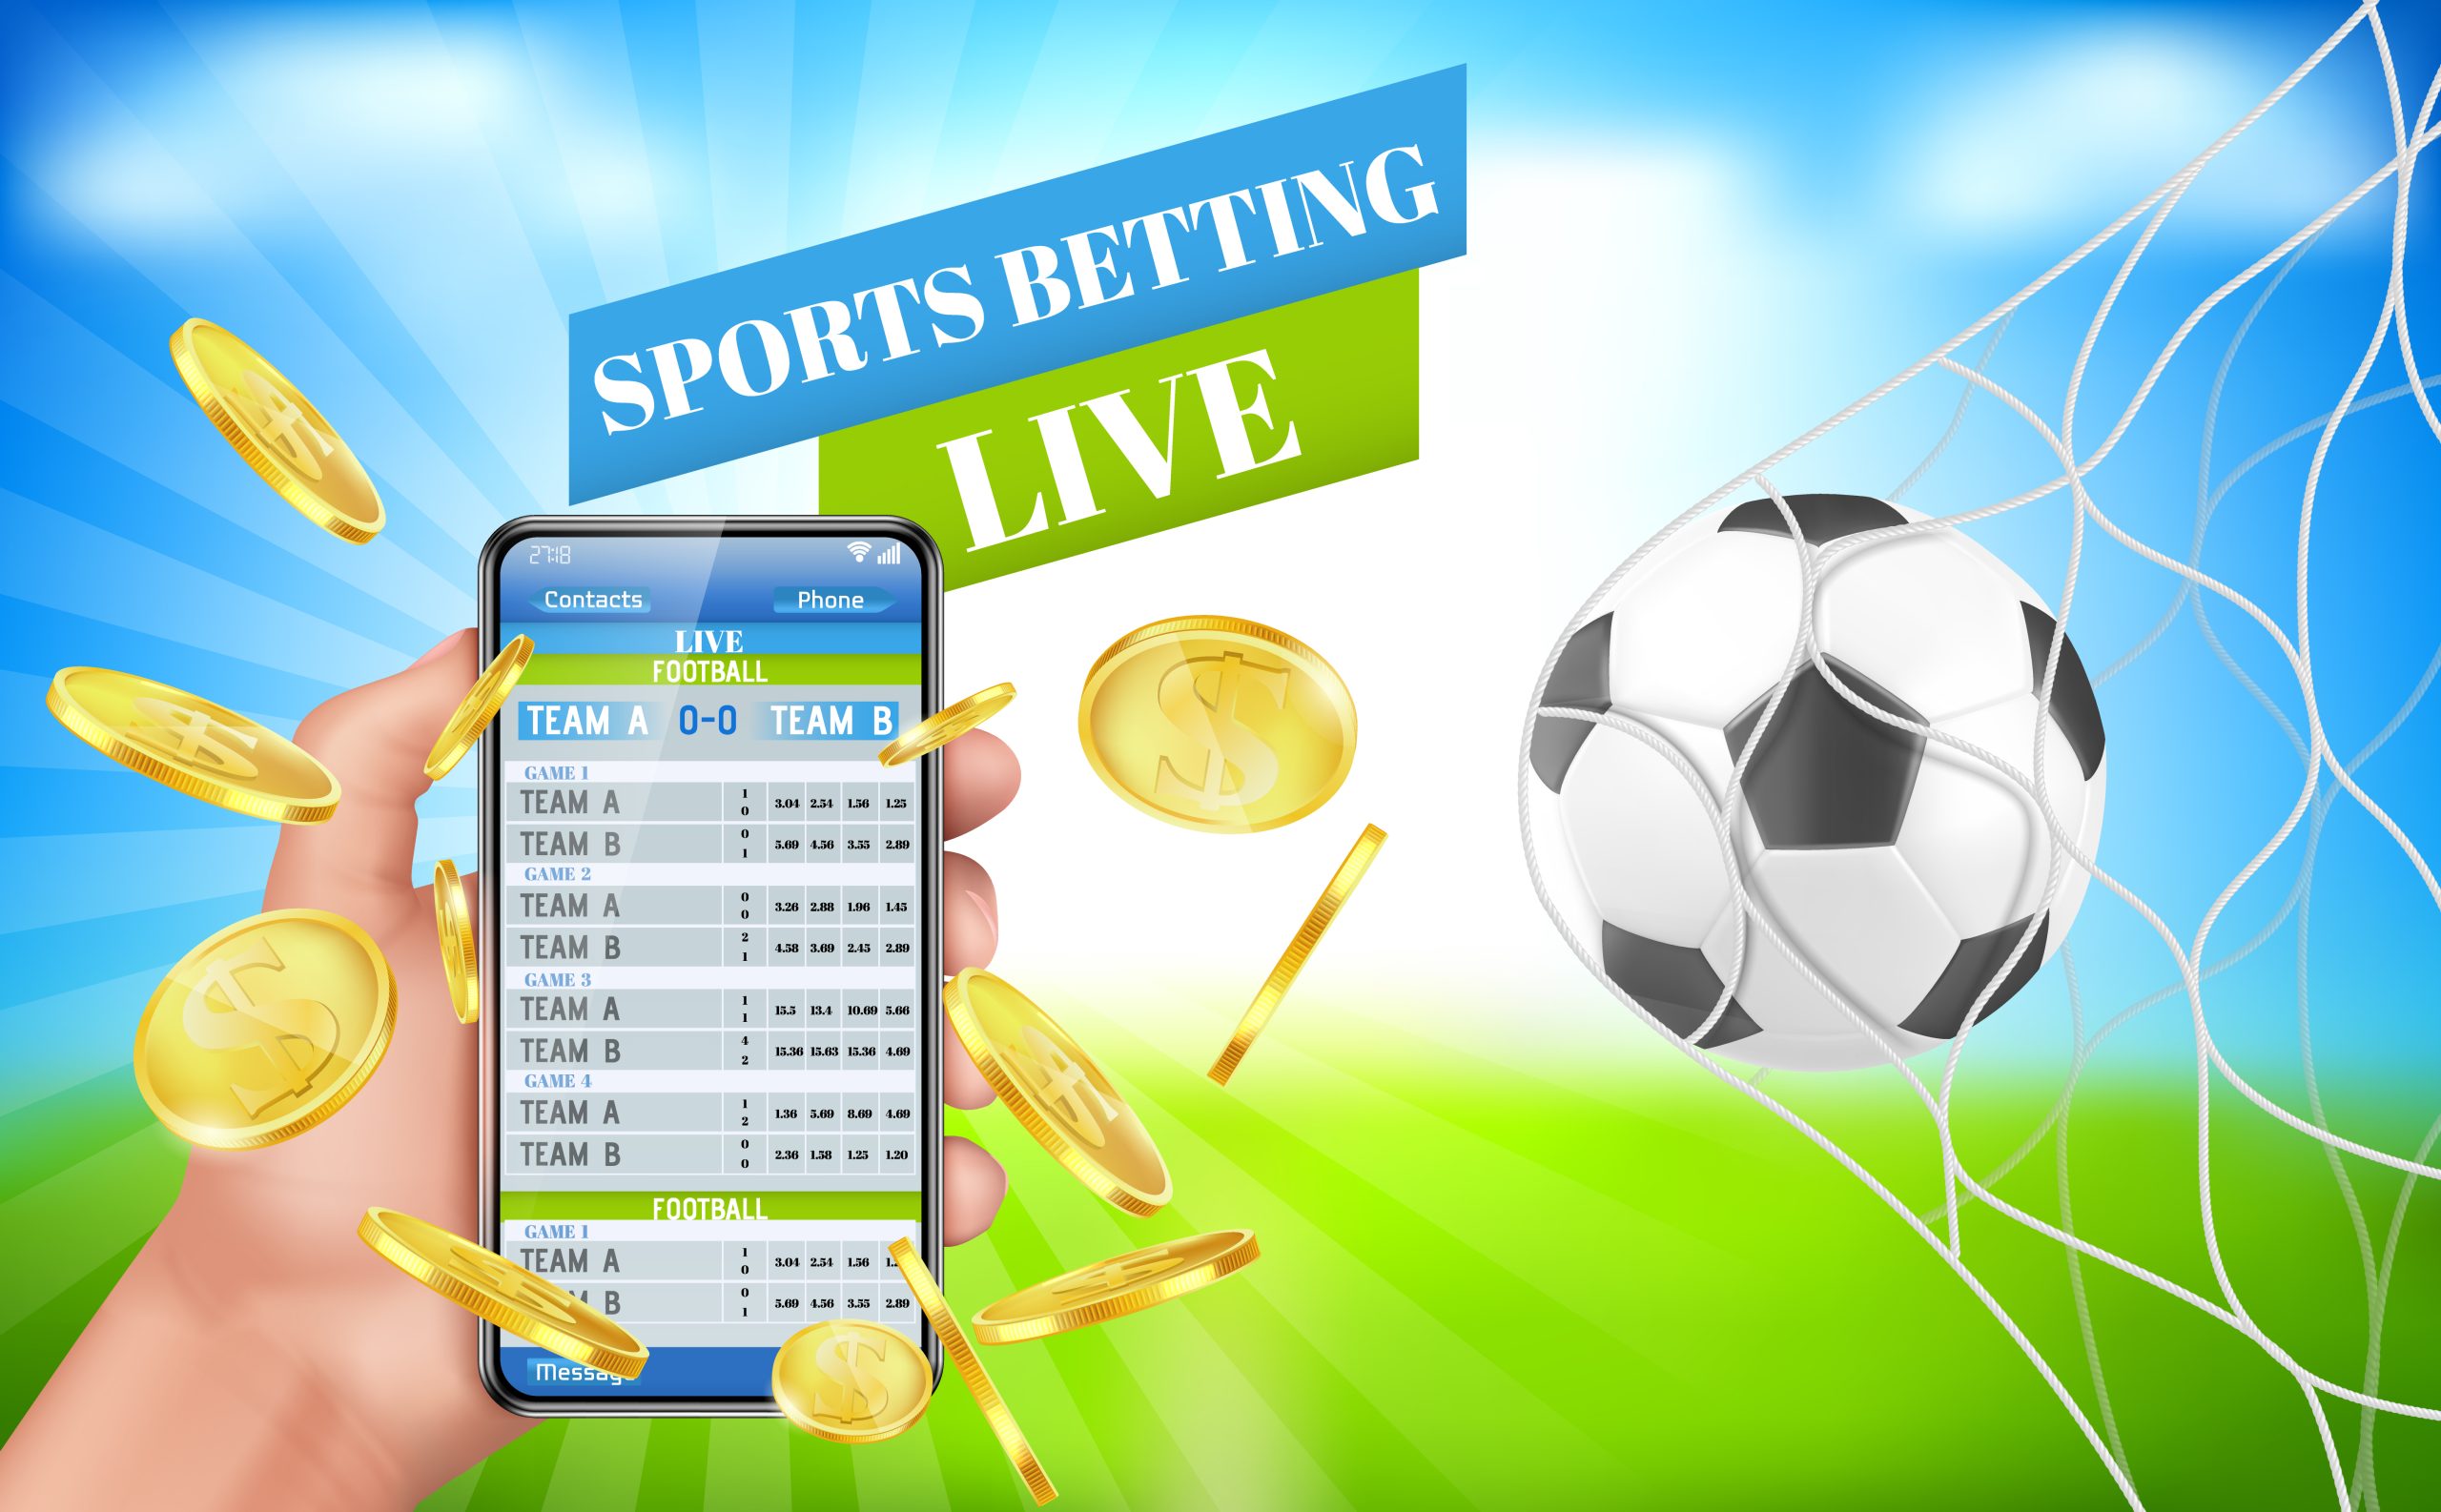 Sports Betting: A Trade or a Trap